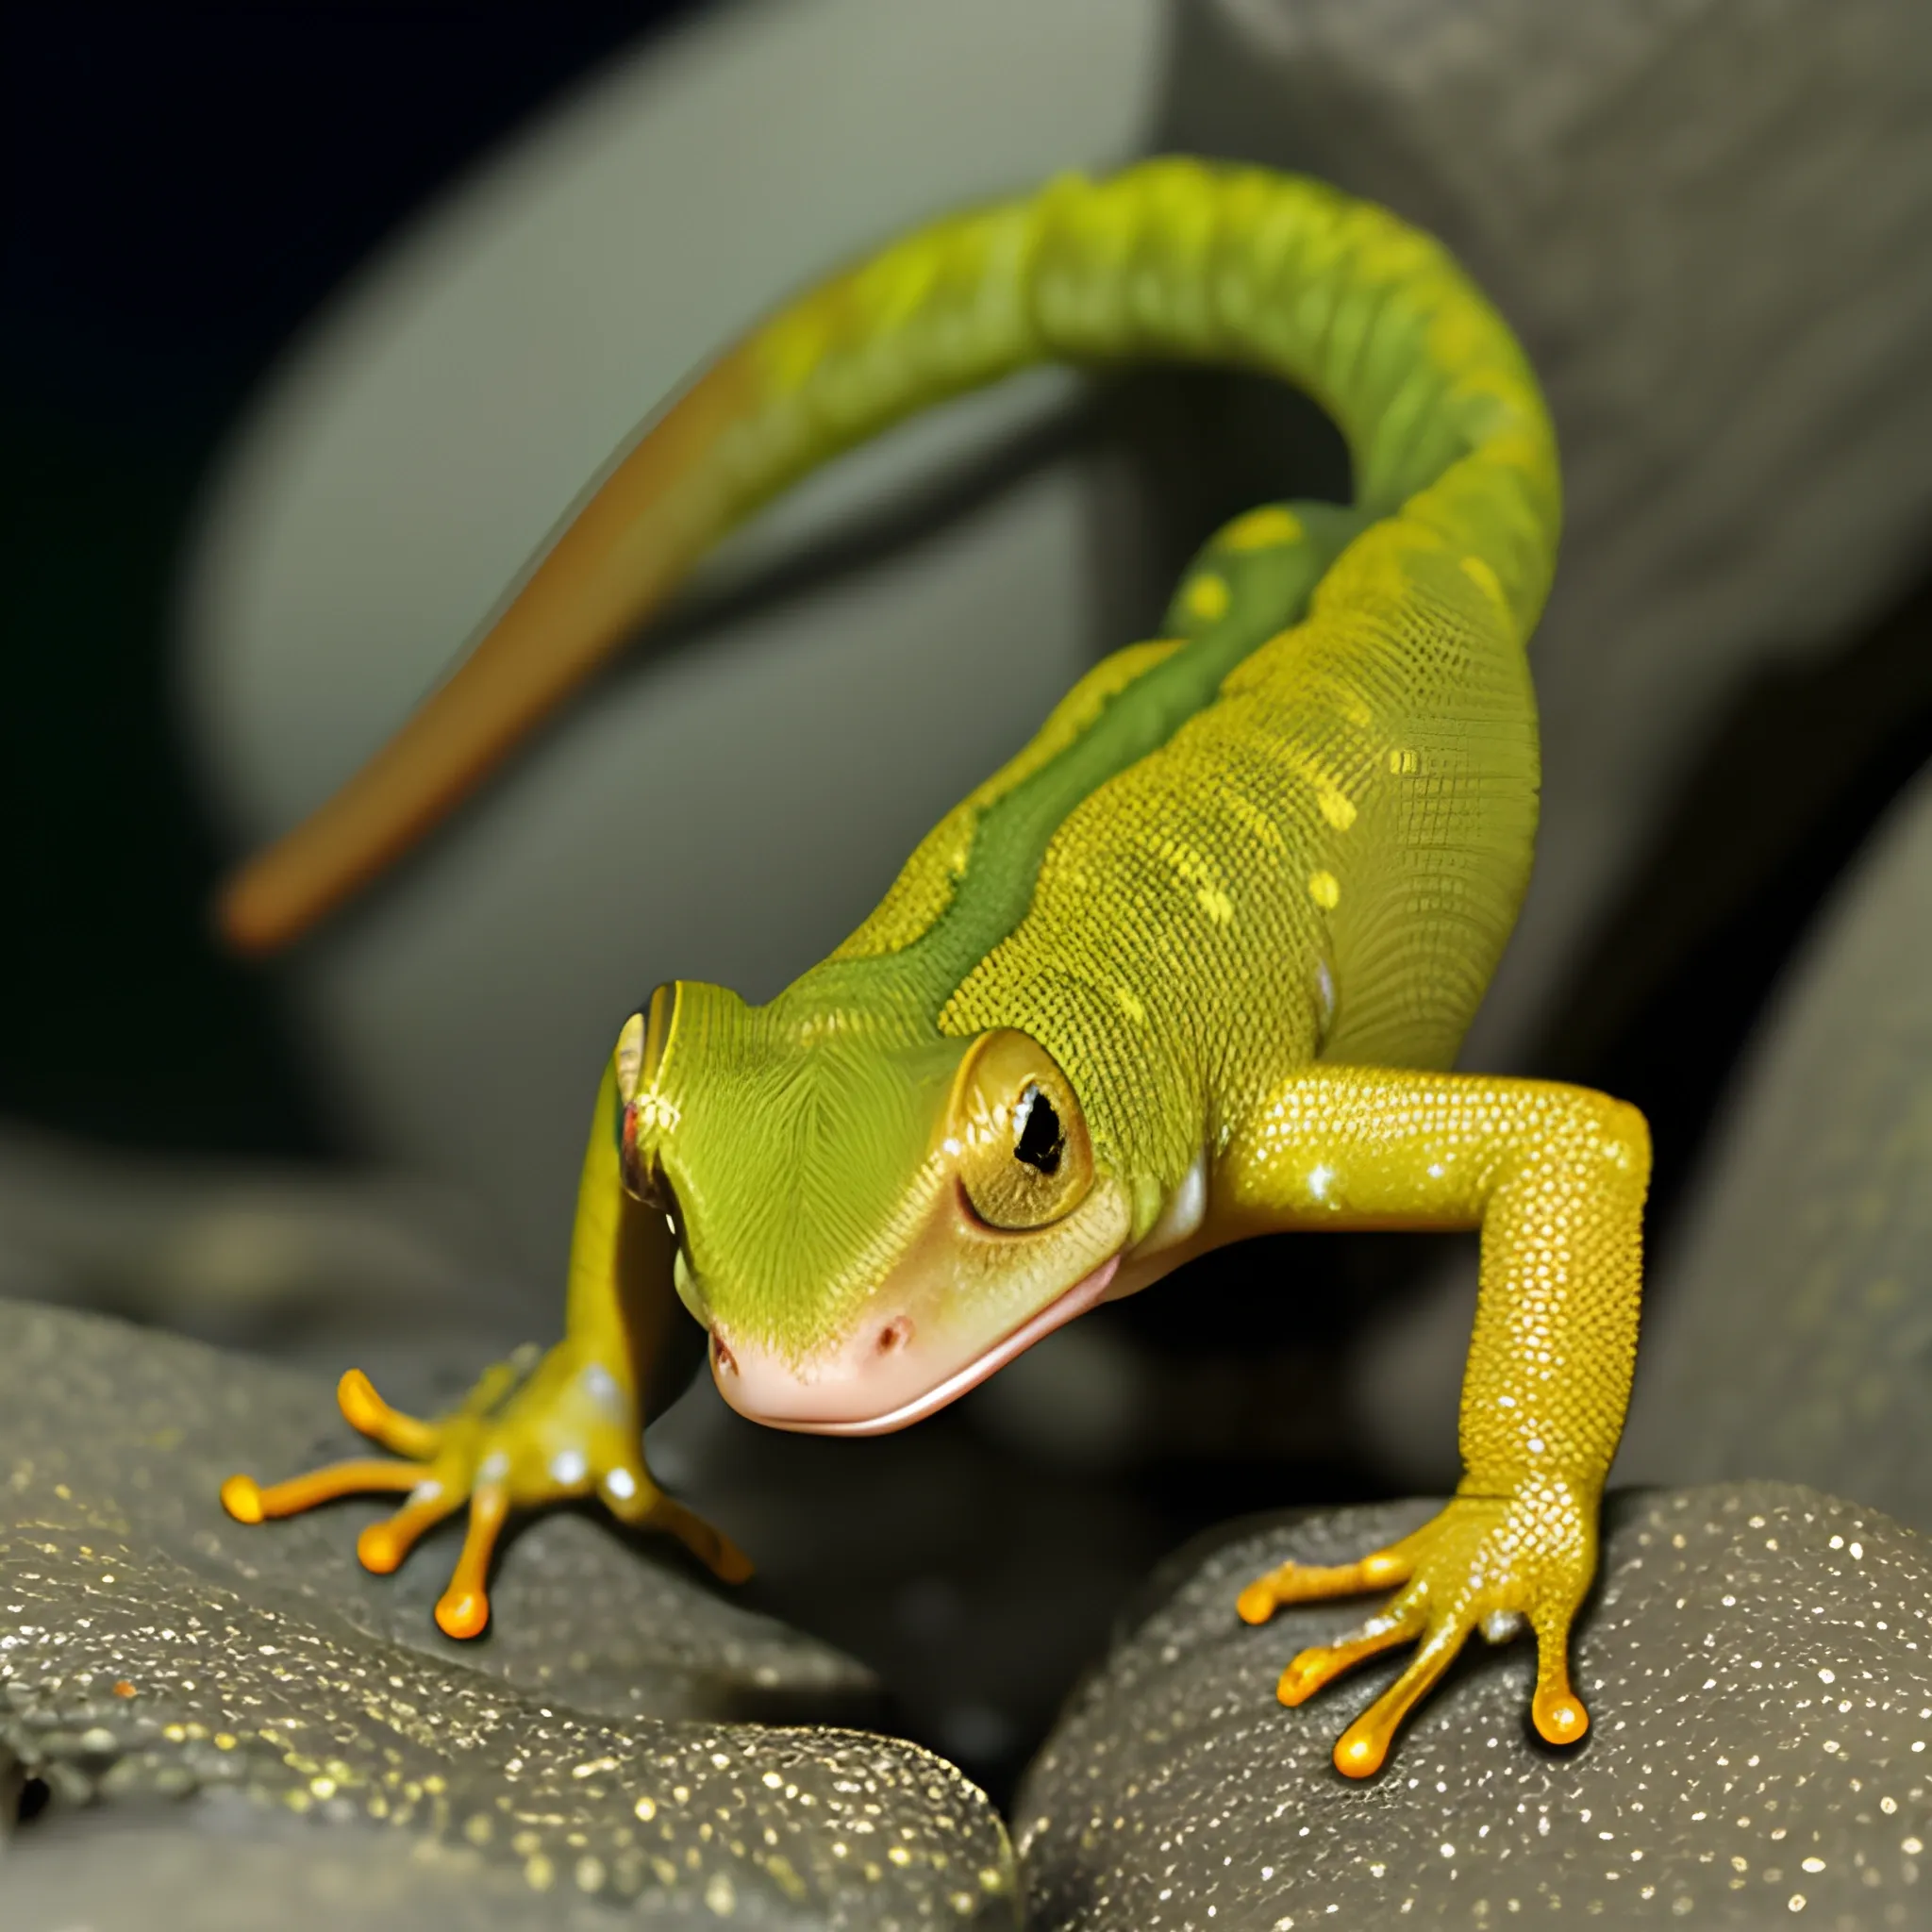 High-speed photography of salamanders mid-hunt, their elongated bodies streaking after prey faster than the eye can see as they skillfully weave through coral and rocks.